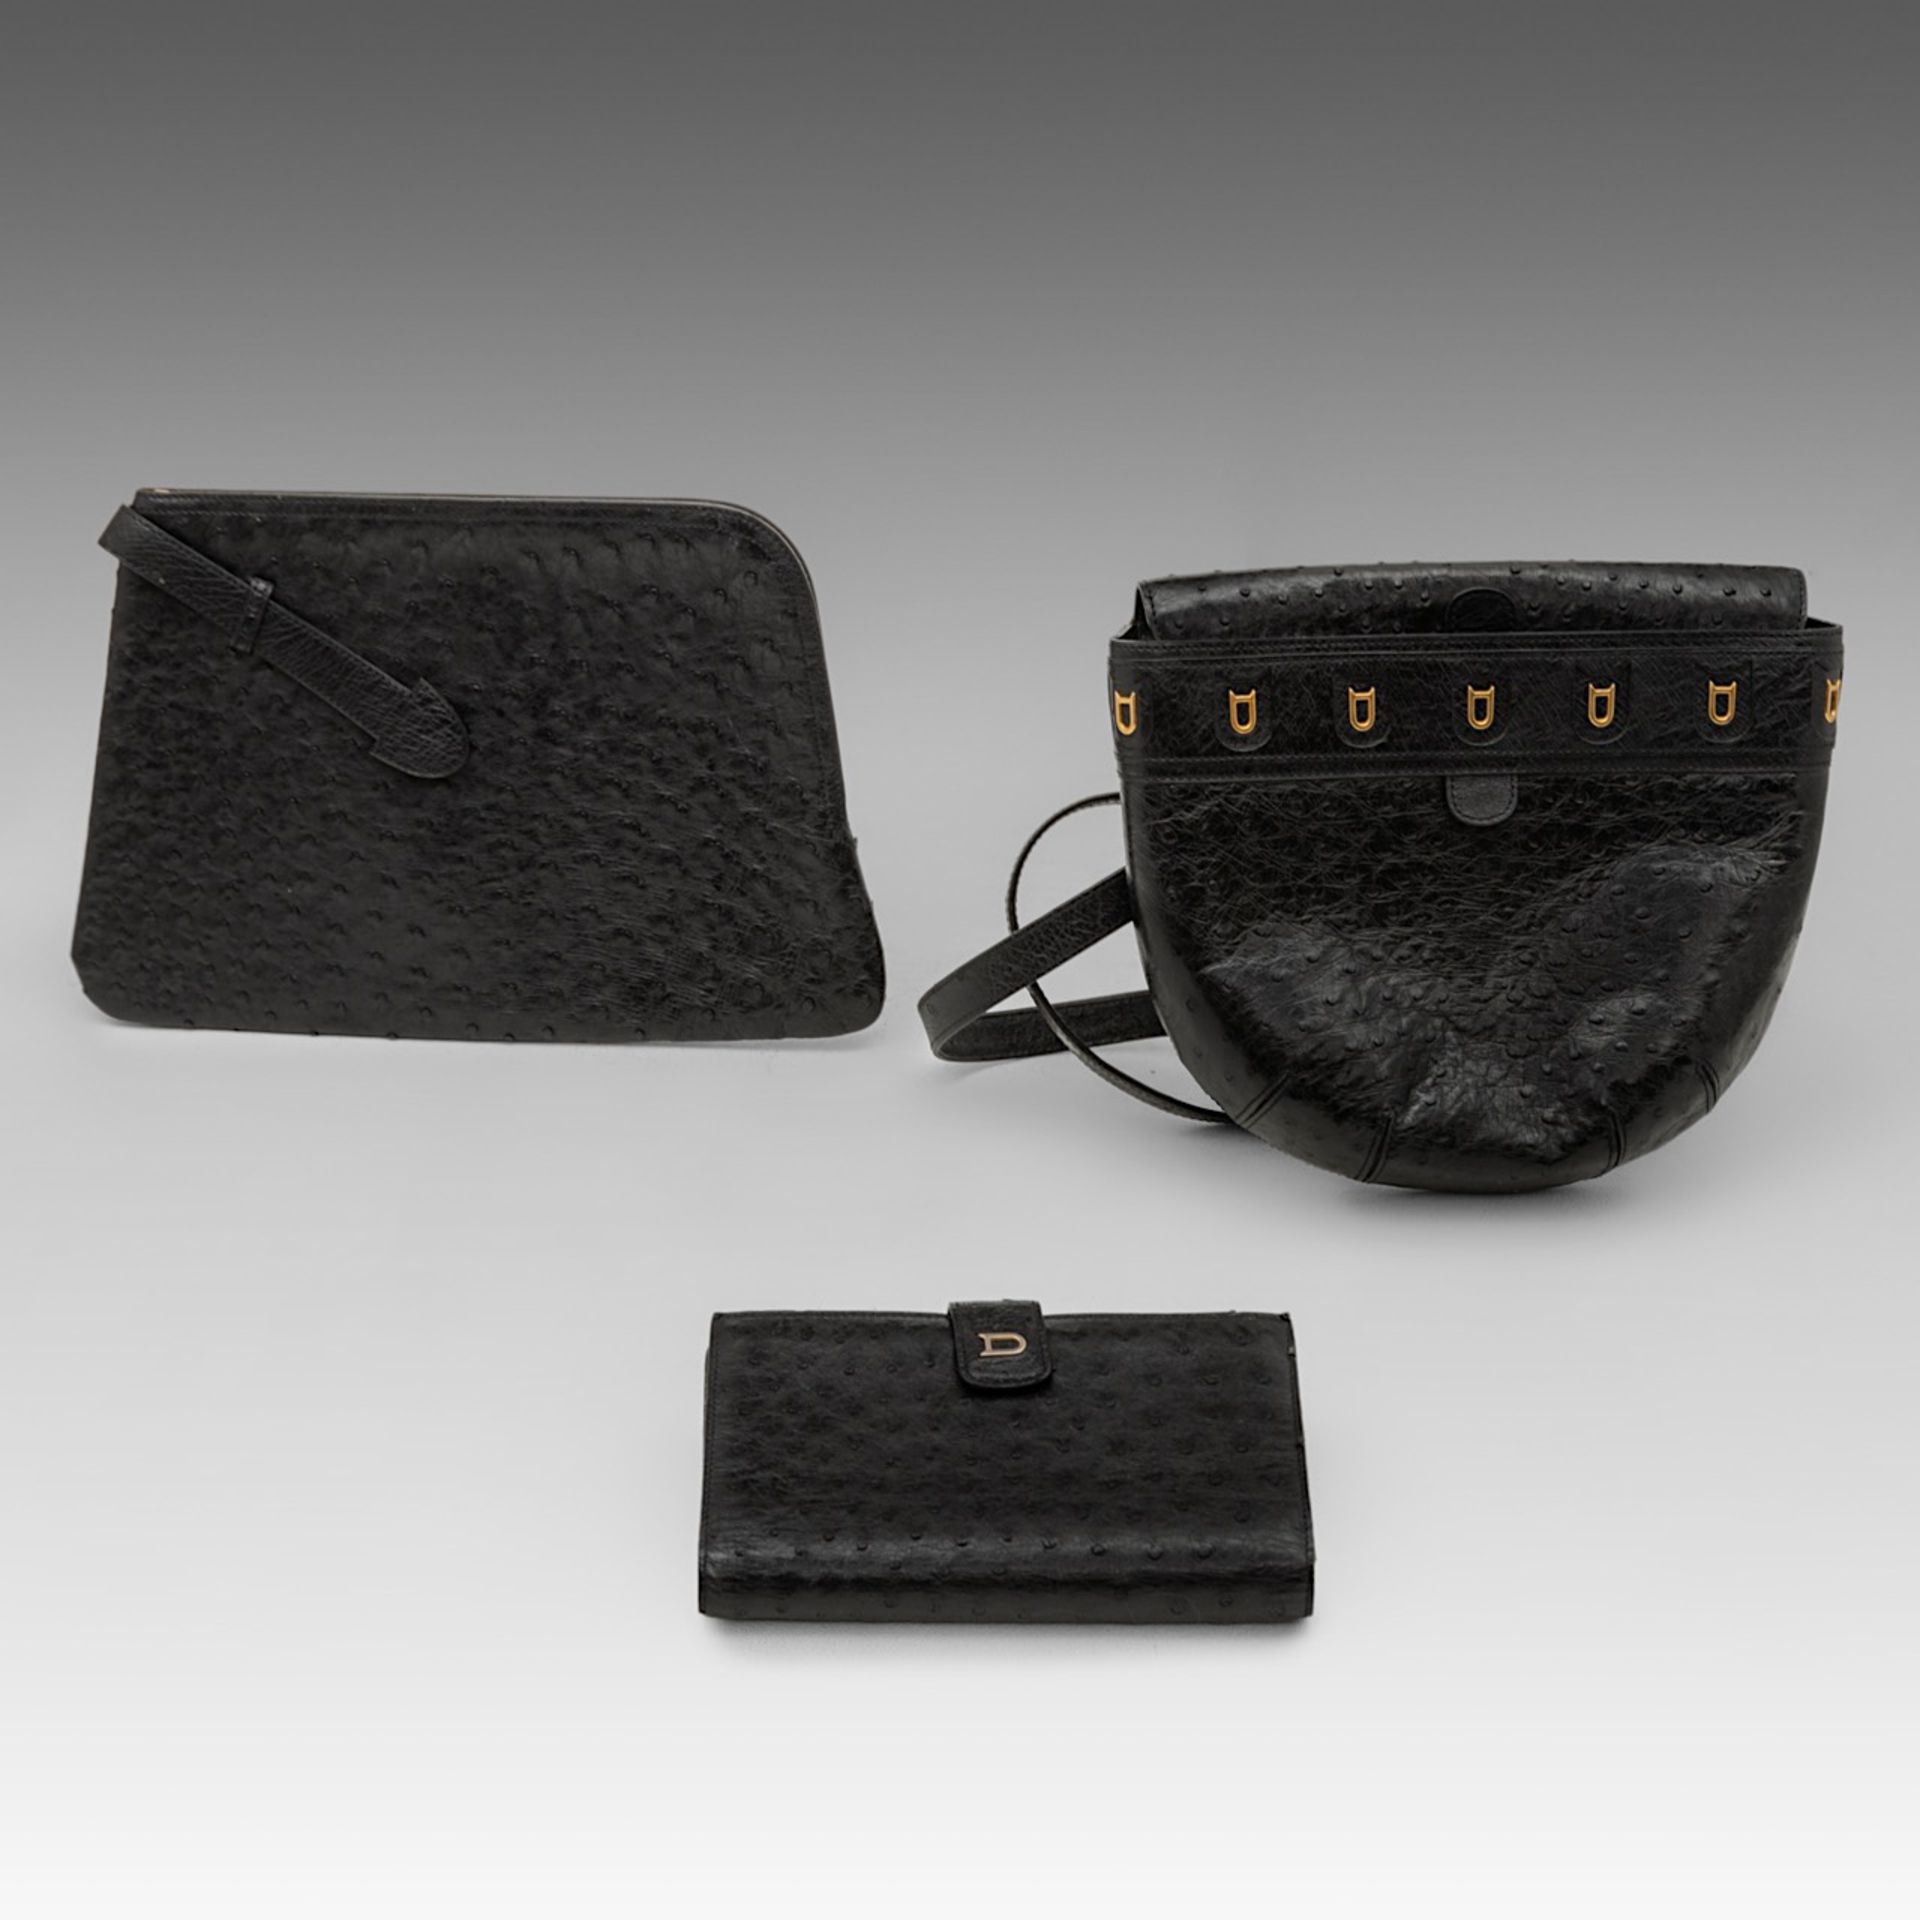 A matching collection of a Delvaux shoulder bag, a clutch and a wallet in black ostrich leather.